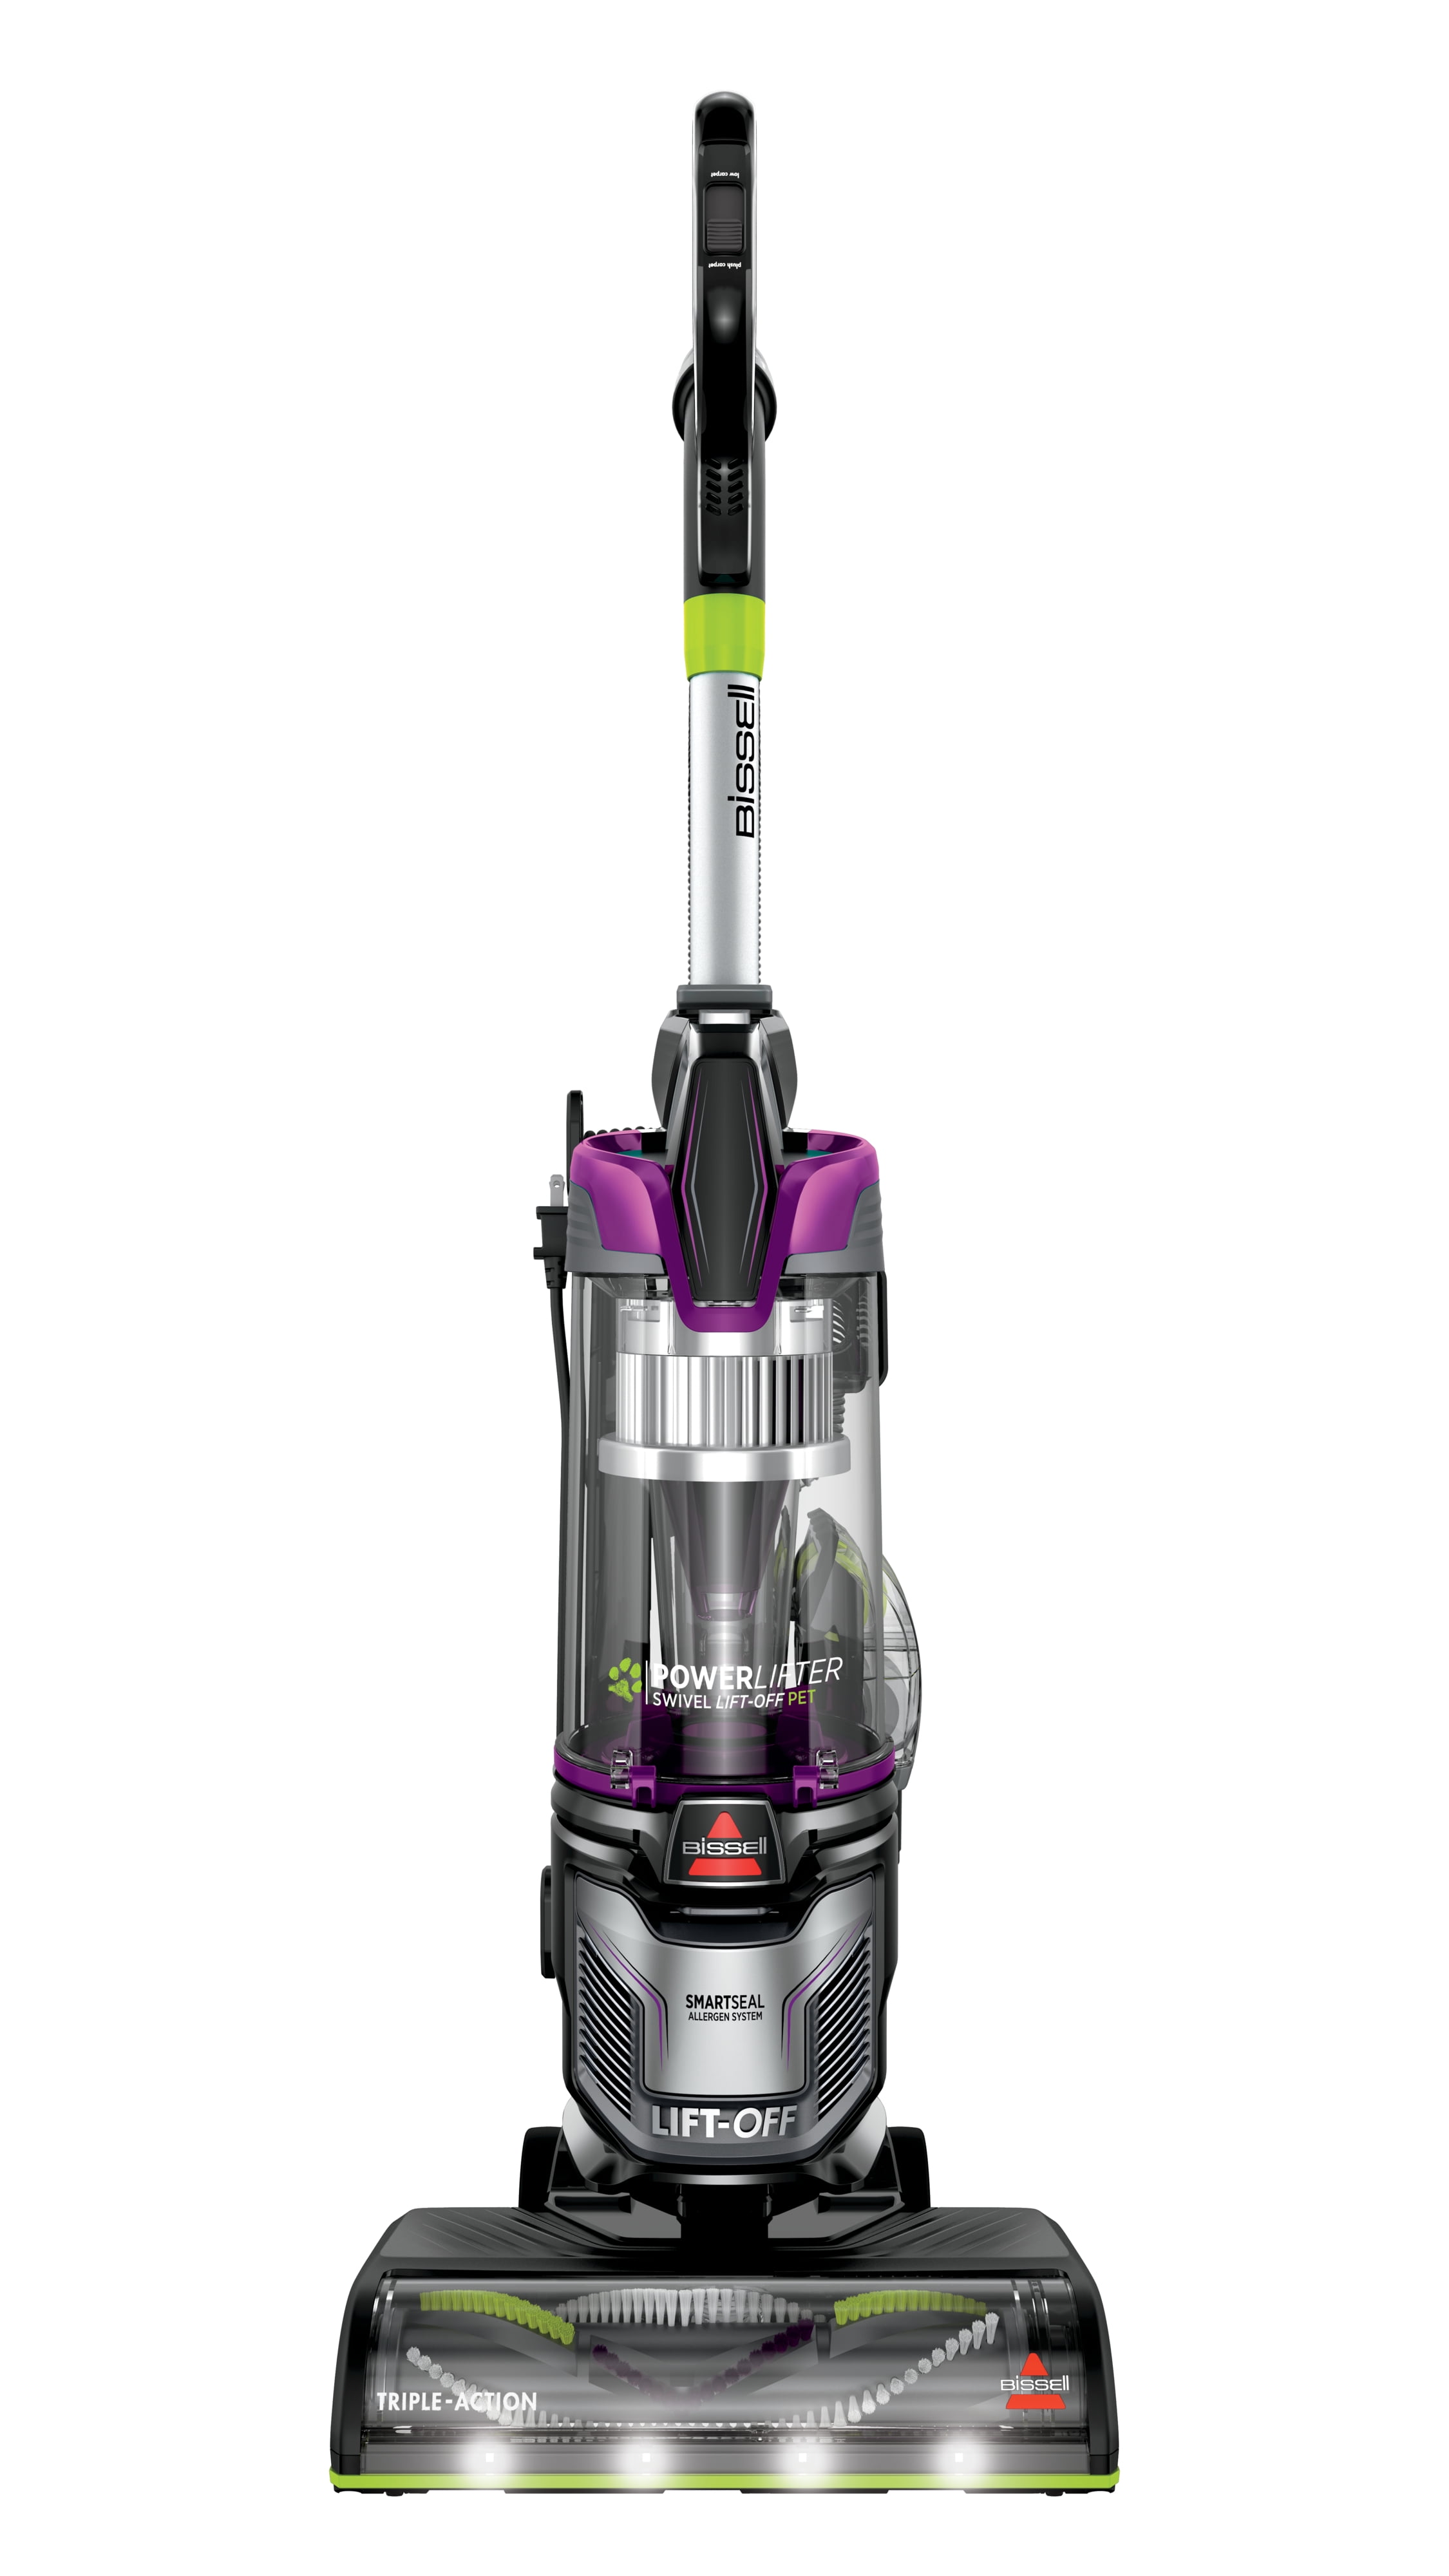 BISSELL Powerlifter Pet Lift-off Upright Vacuum Cleaner – 2920